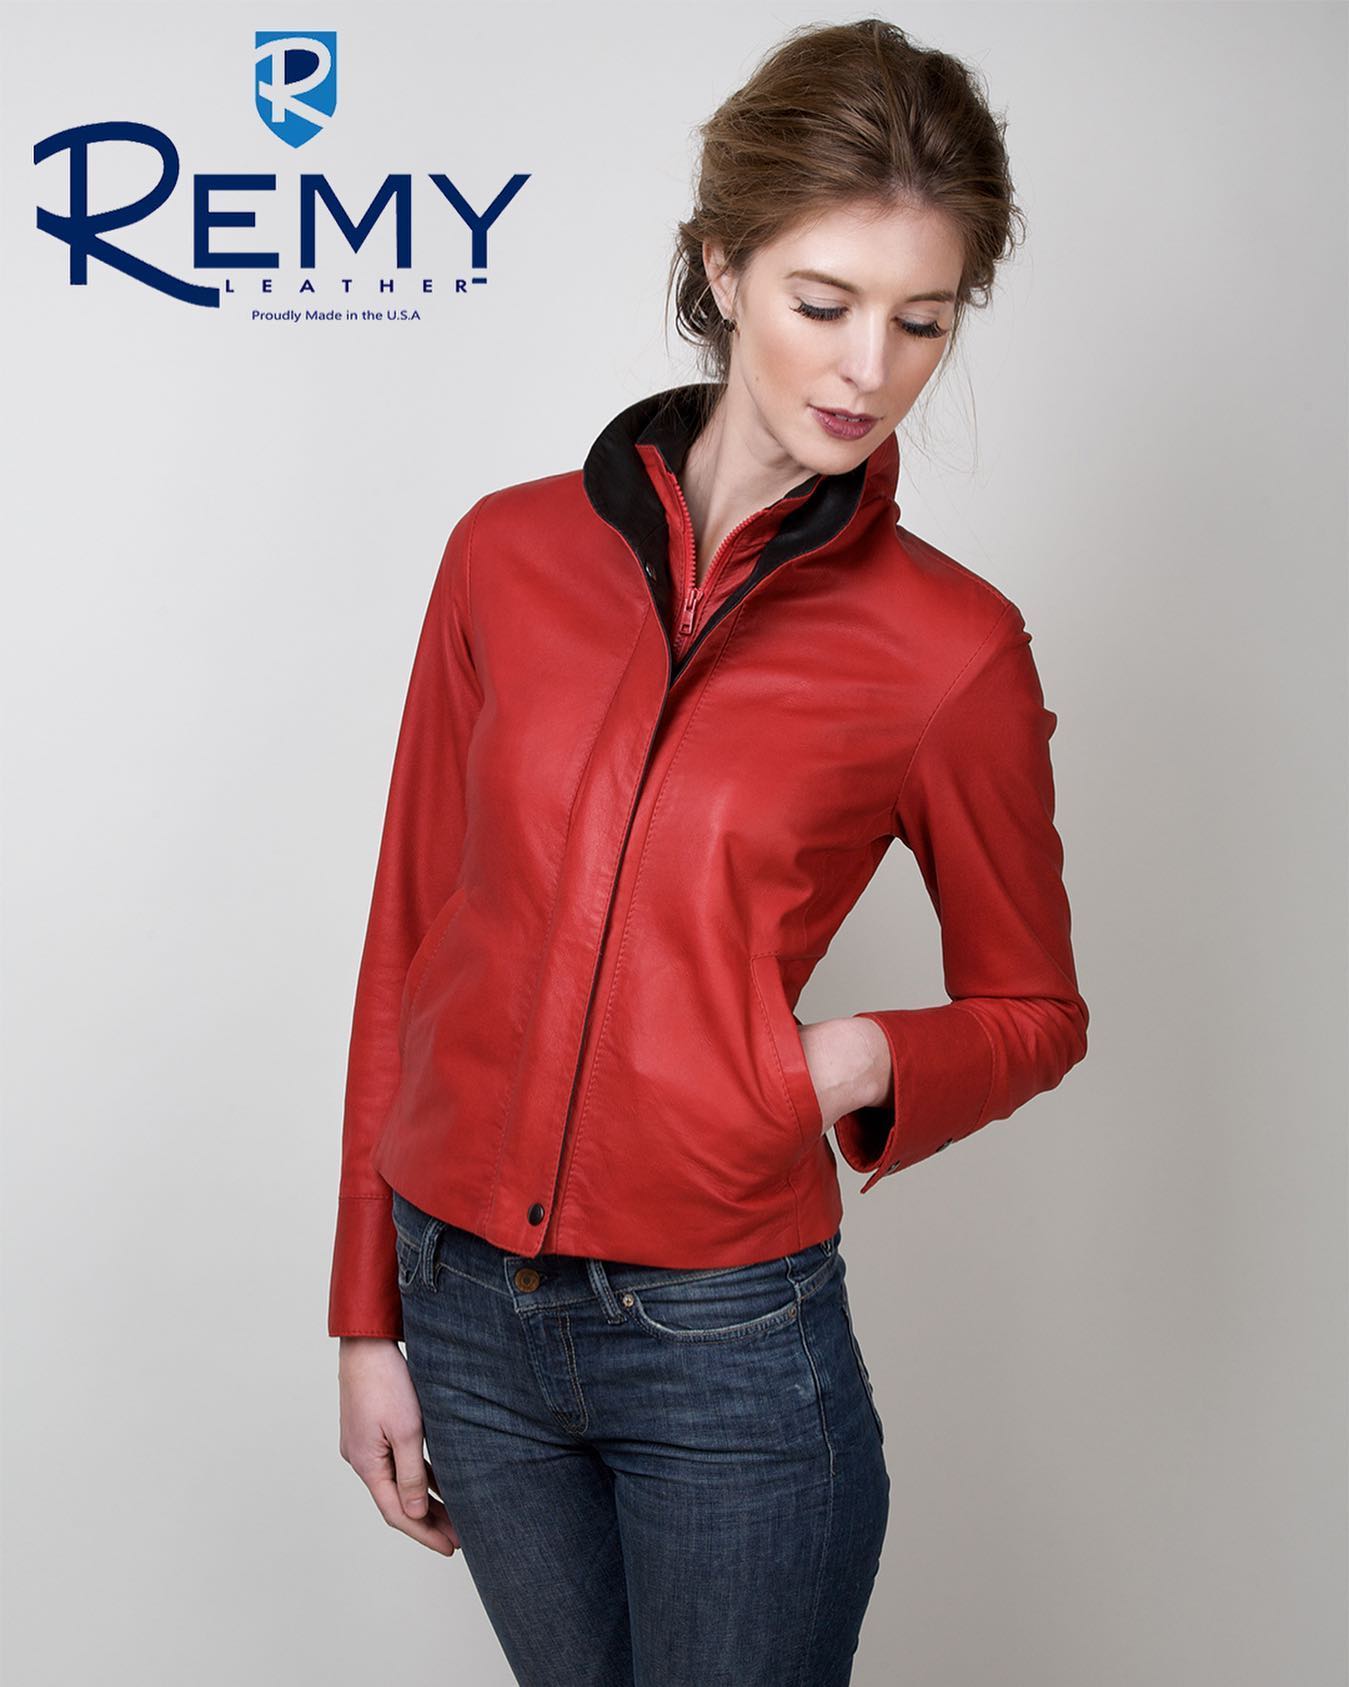 Women's Remy Red Double Collar Light Leather – Pegasus Leather (Sausalito)